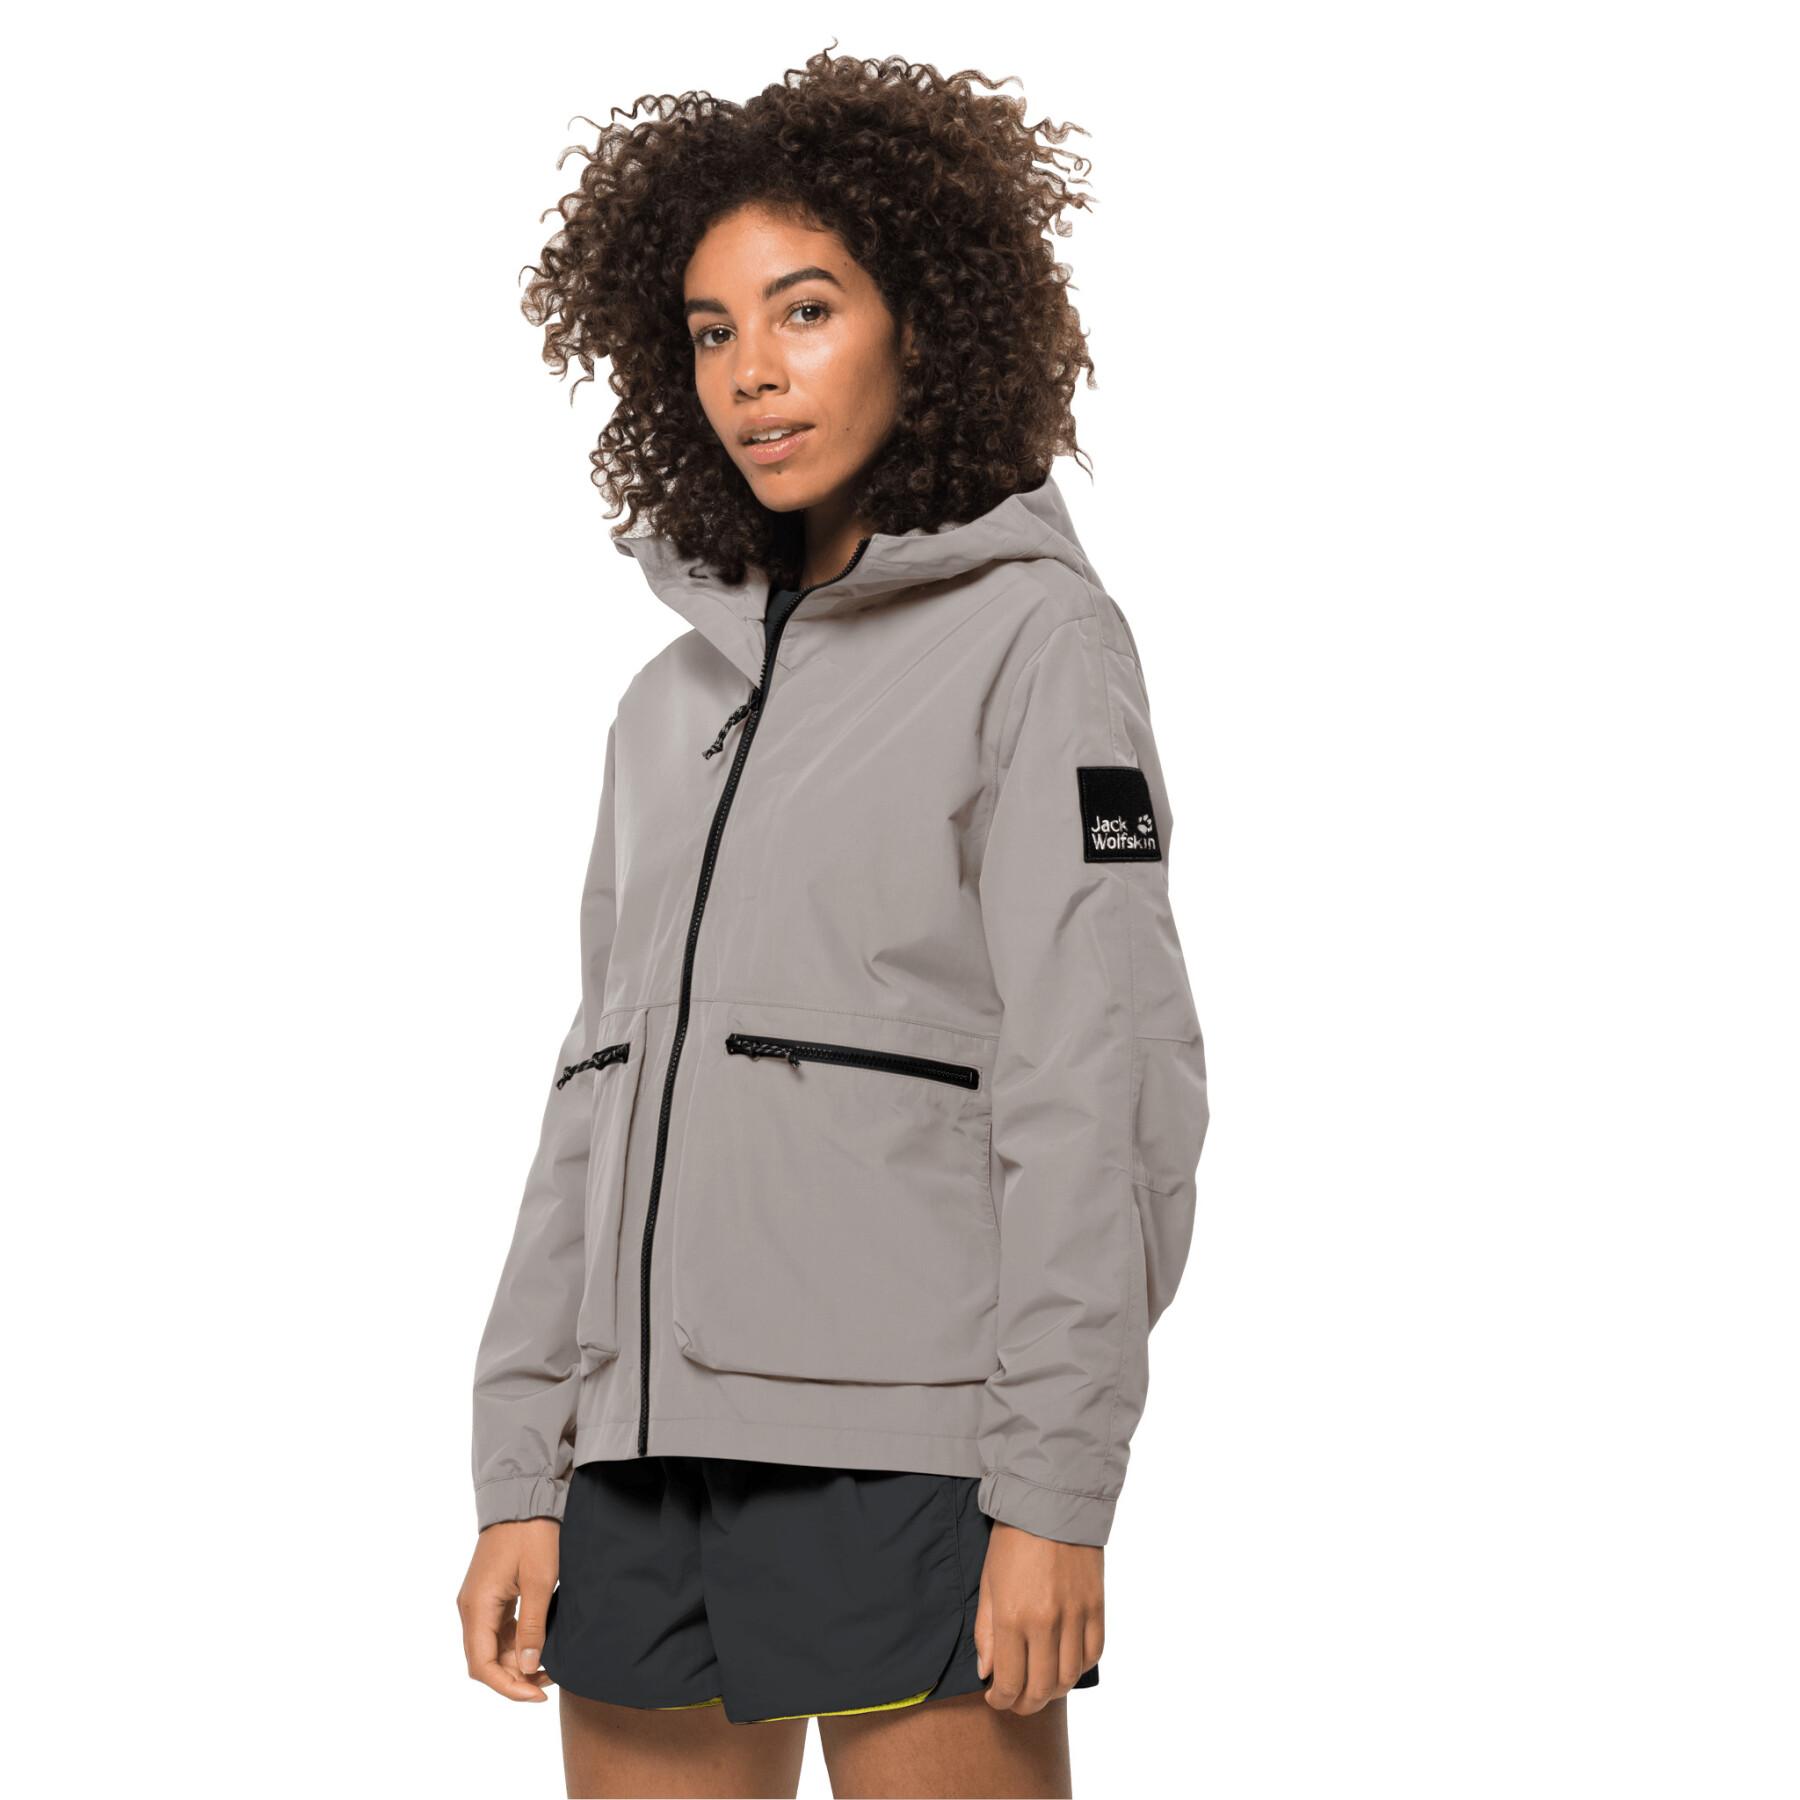 Chaqueta impermeable para mujer Jack Wolfskin 365 Rebel XS/XL